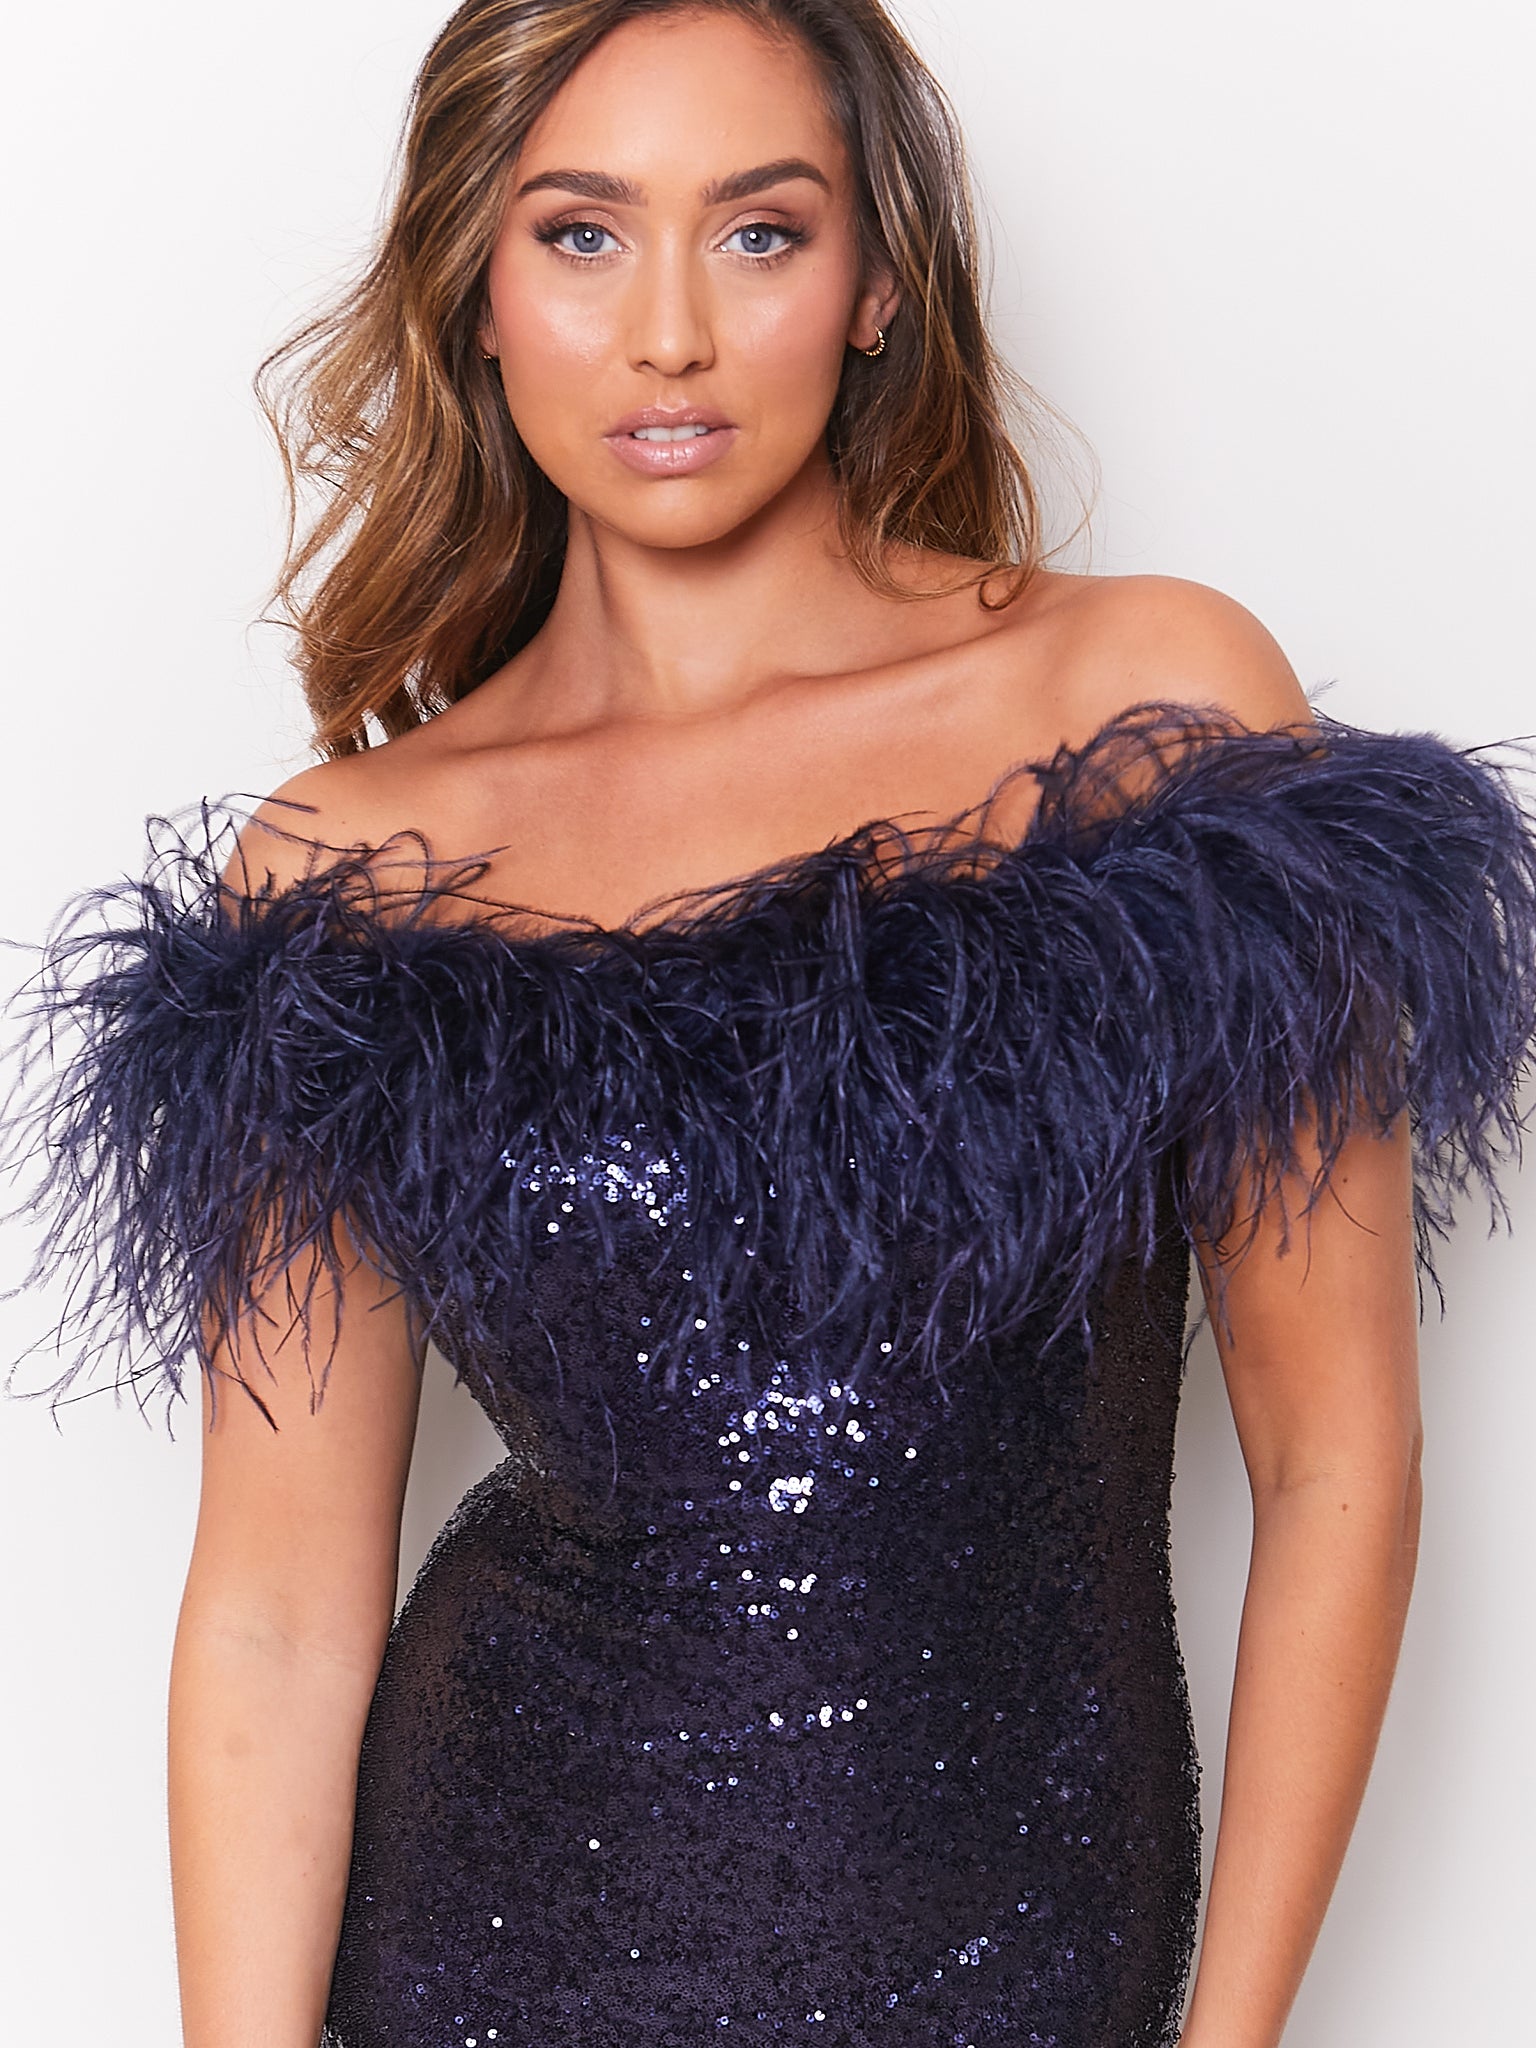 Top Trends for Prom 2023 - Dress 2 Party